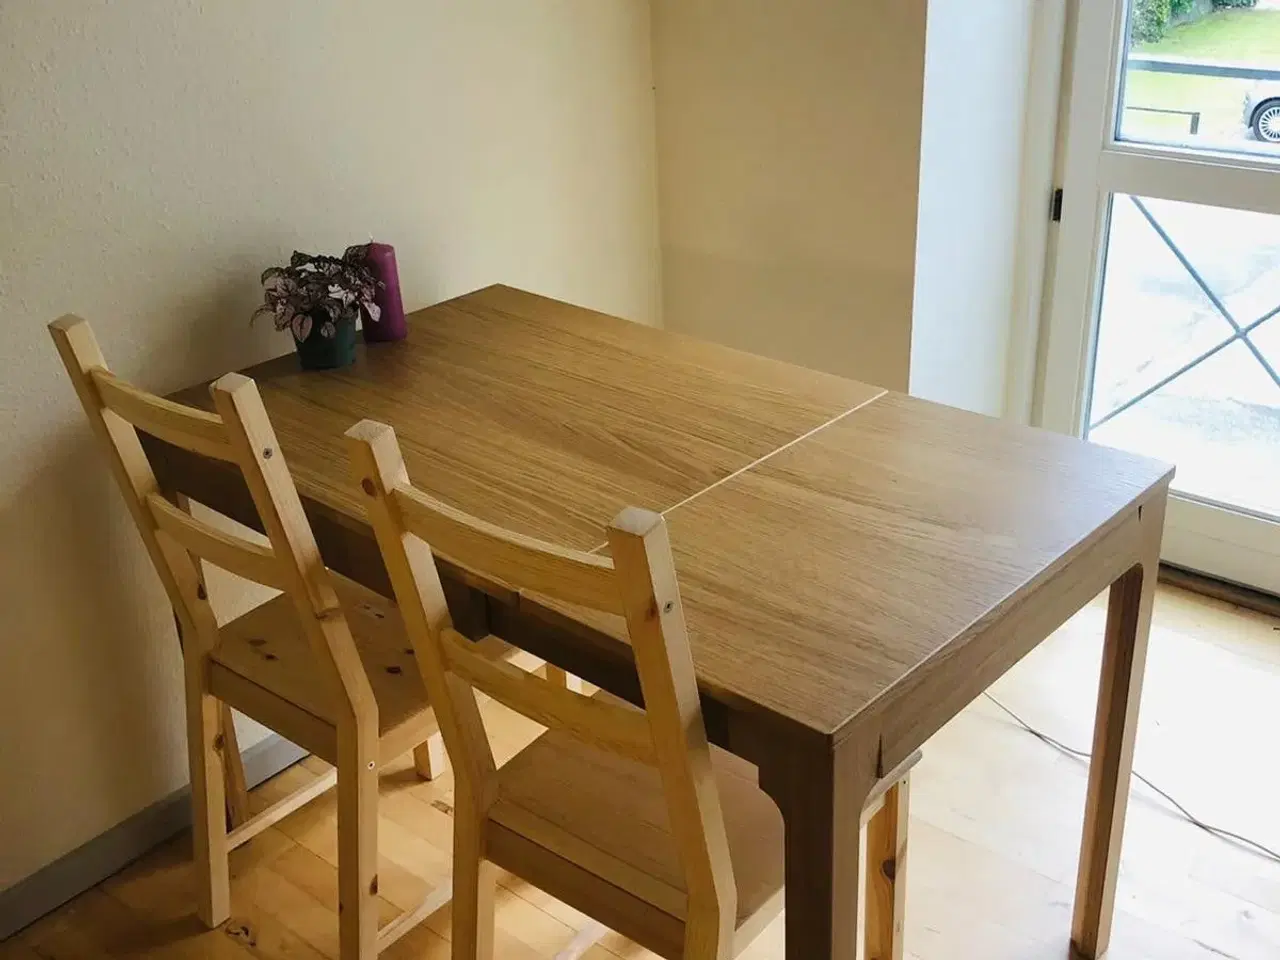 Billede 2 - IKEA table for 4 people and 2 chairs for 1000 Kr.